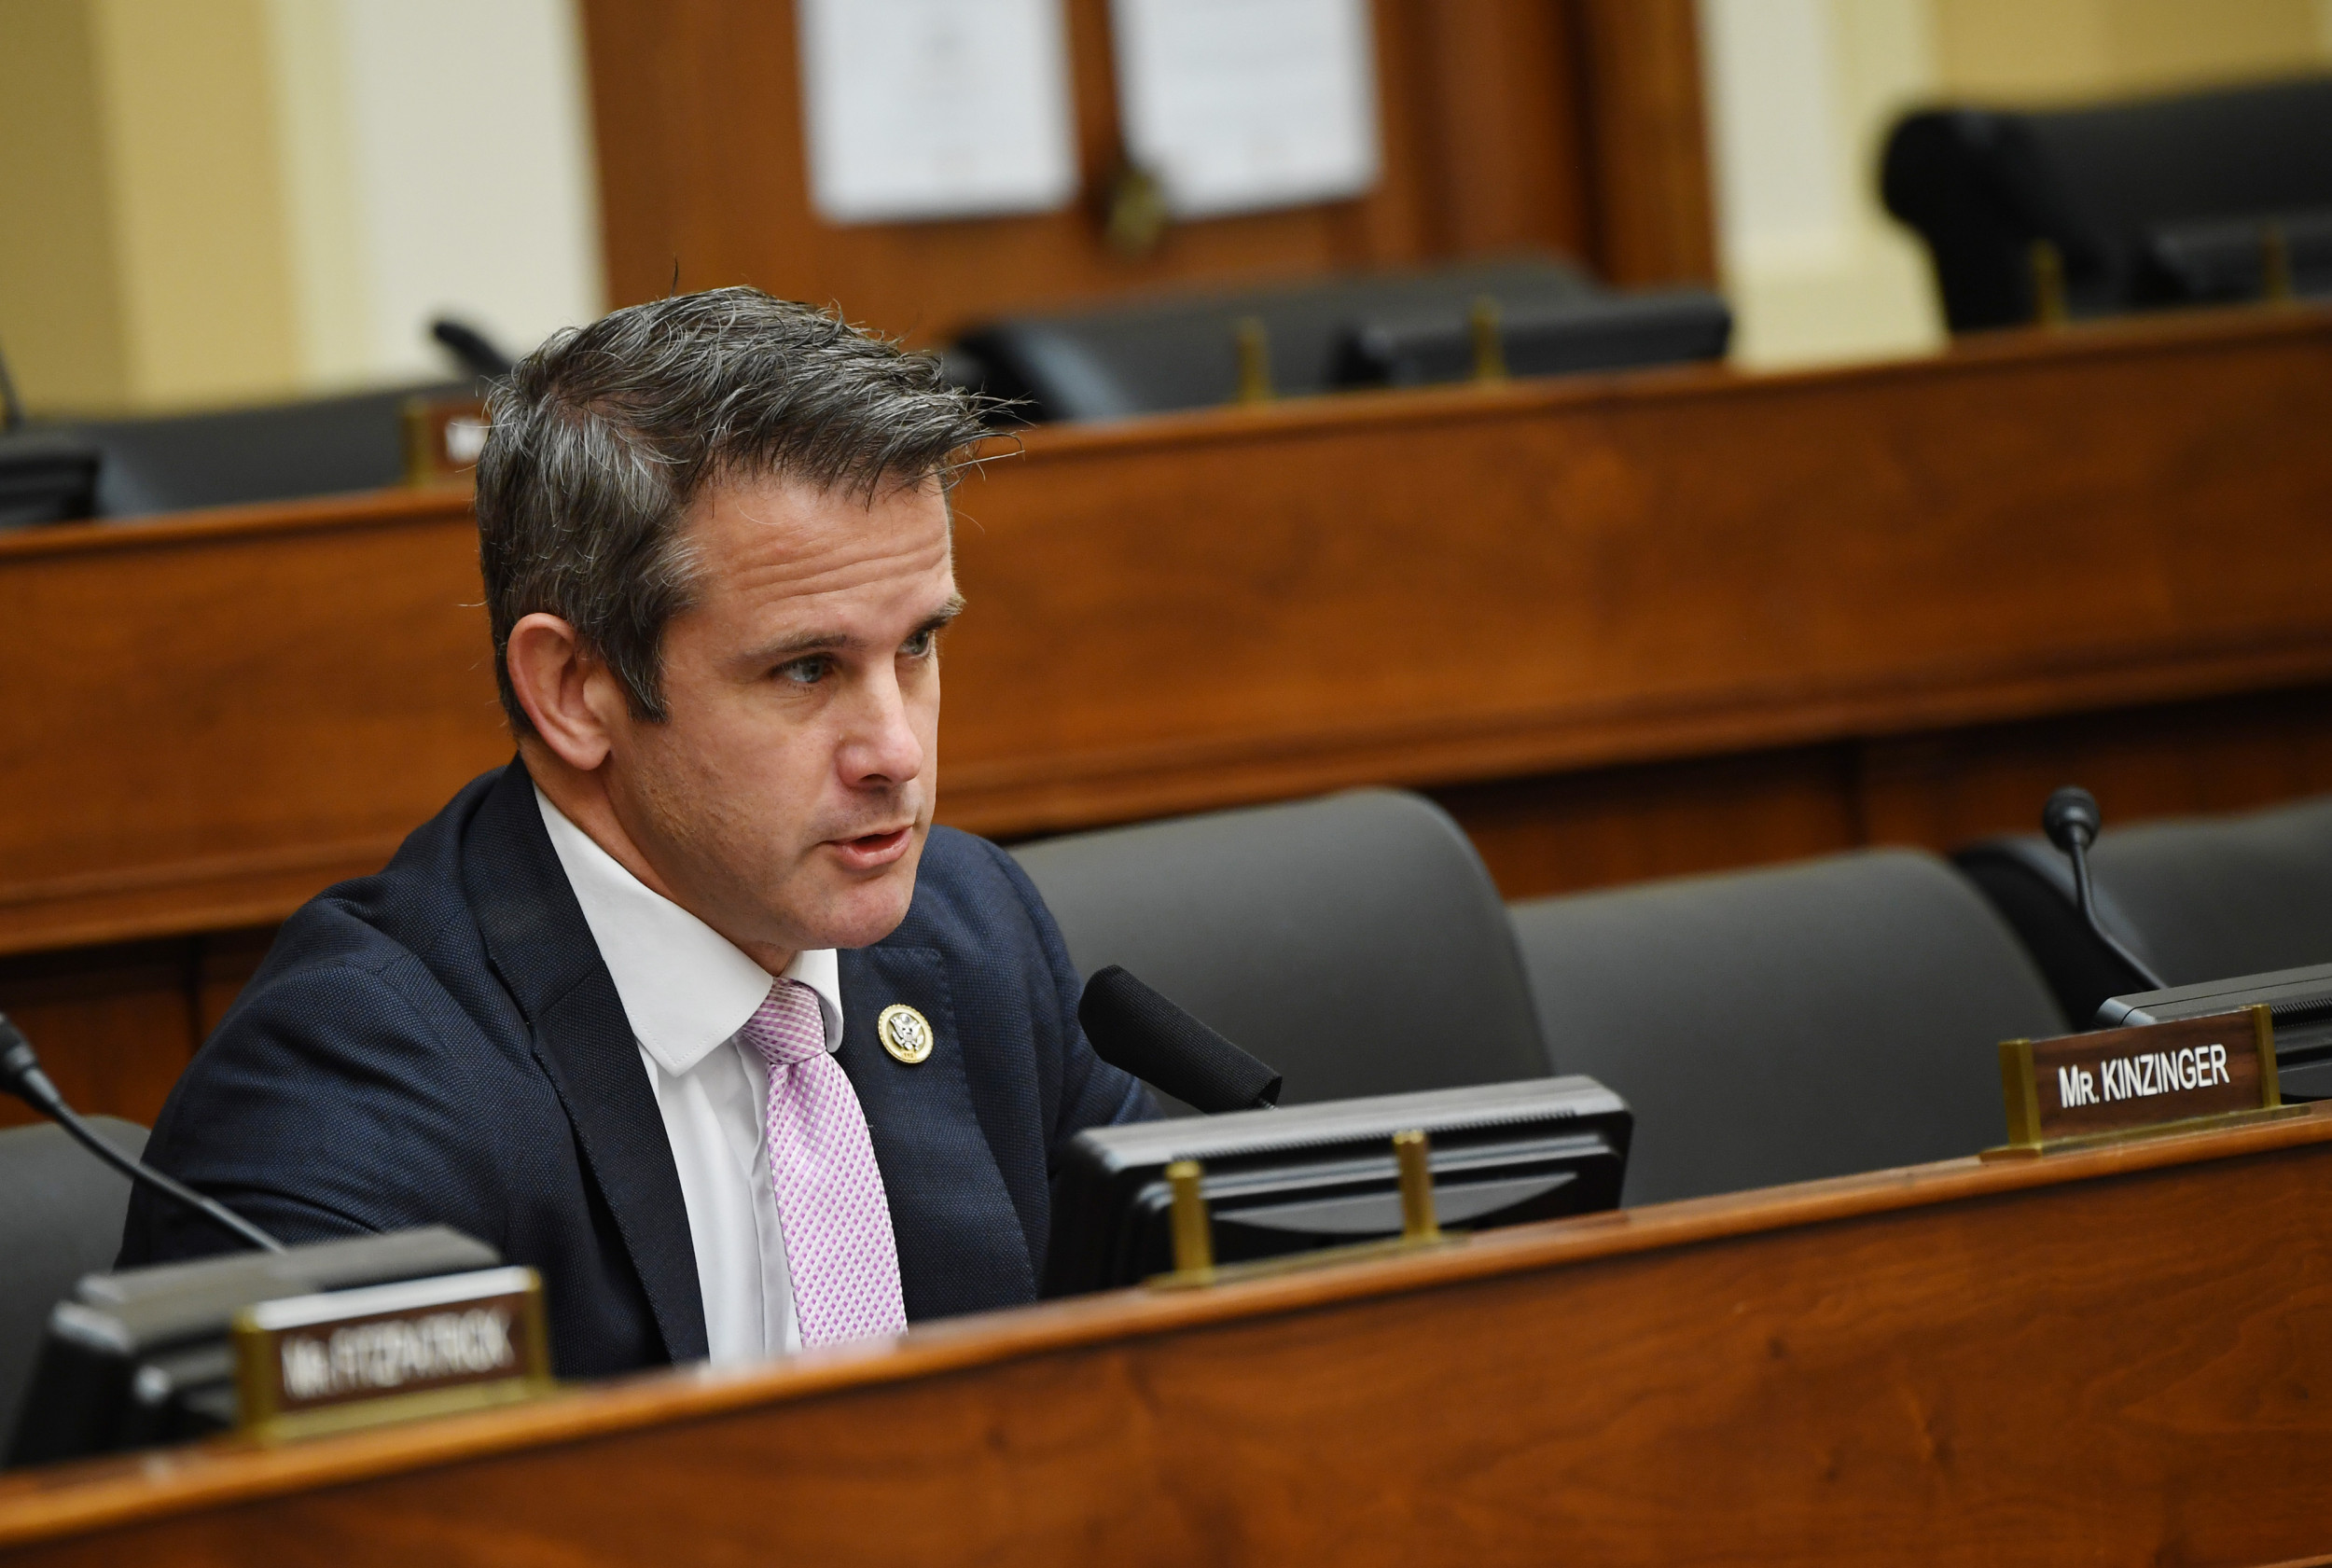 IDP Representative Adam Kinzinger calls on the party to expel ‘White Supremacy Caucus’ led by Marjorie Taylor Greene